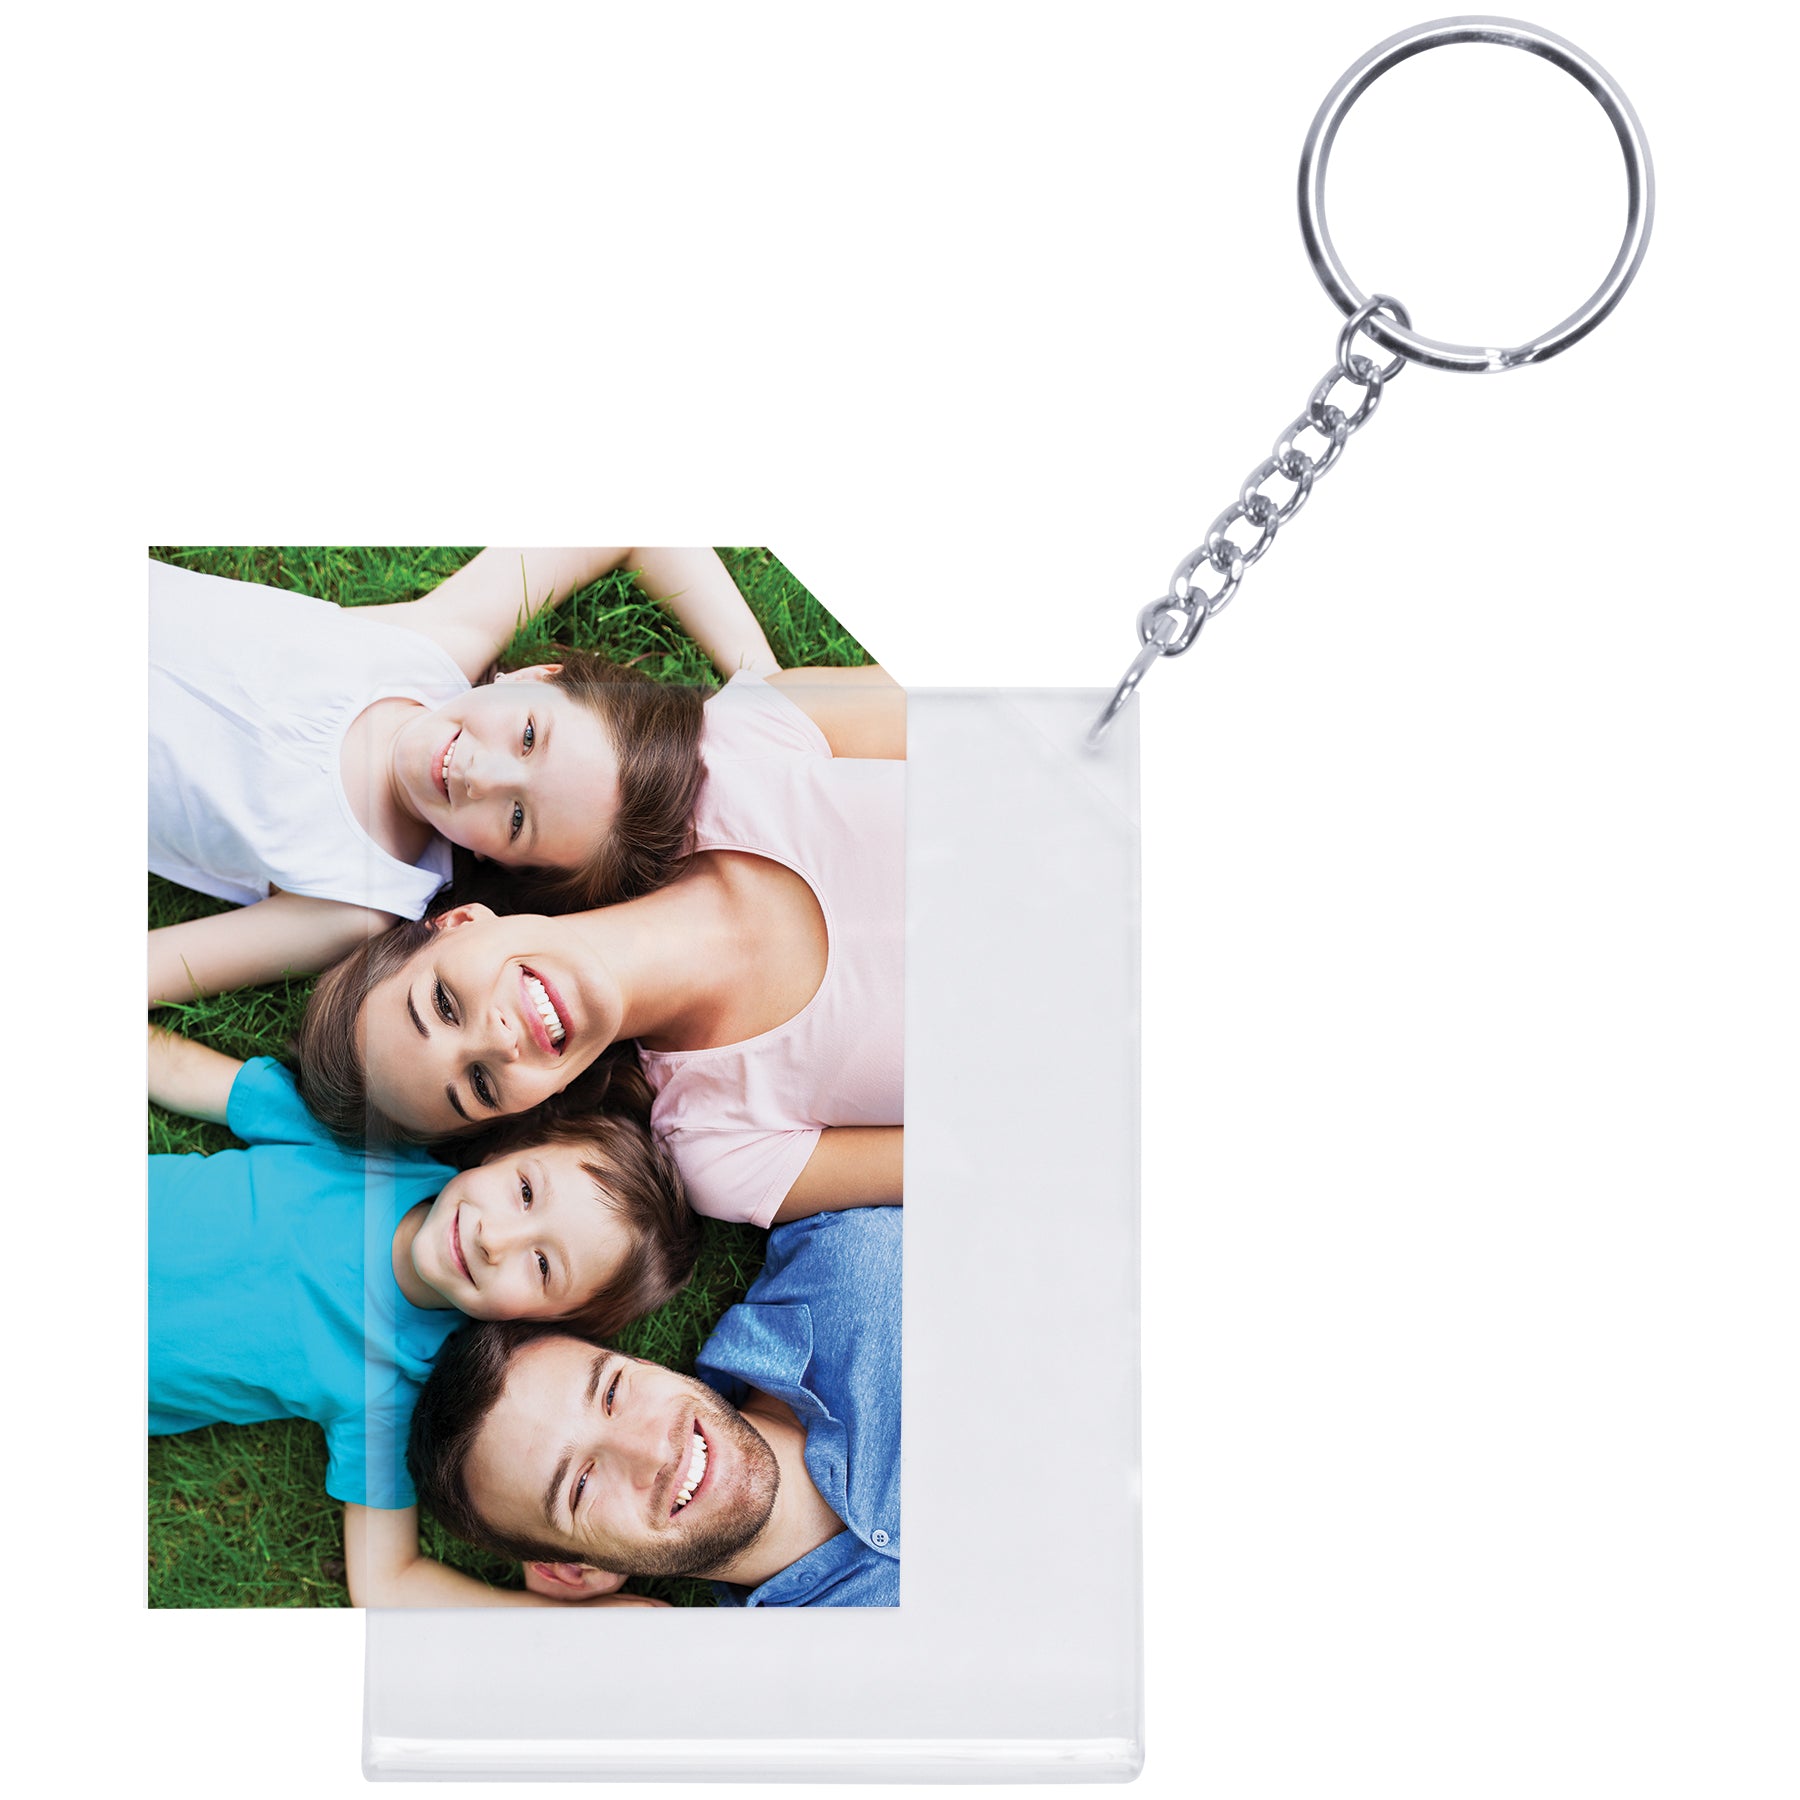 Novelty Picture Frame Key Chains Lot of 36 Clear Acrylic Photo Transparent Keychains